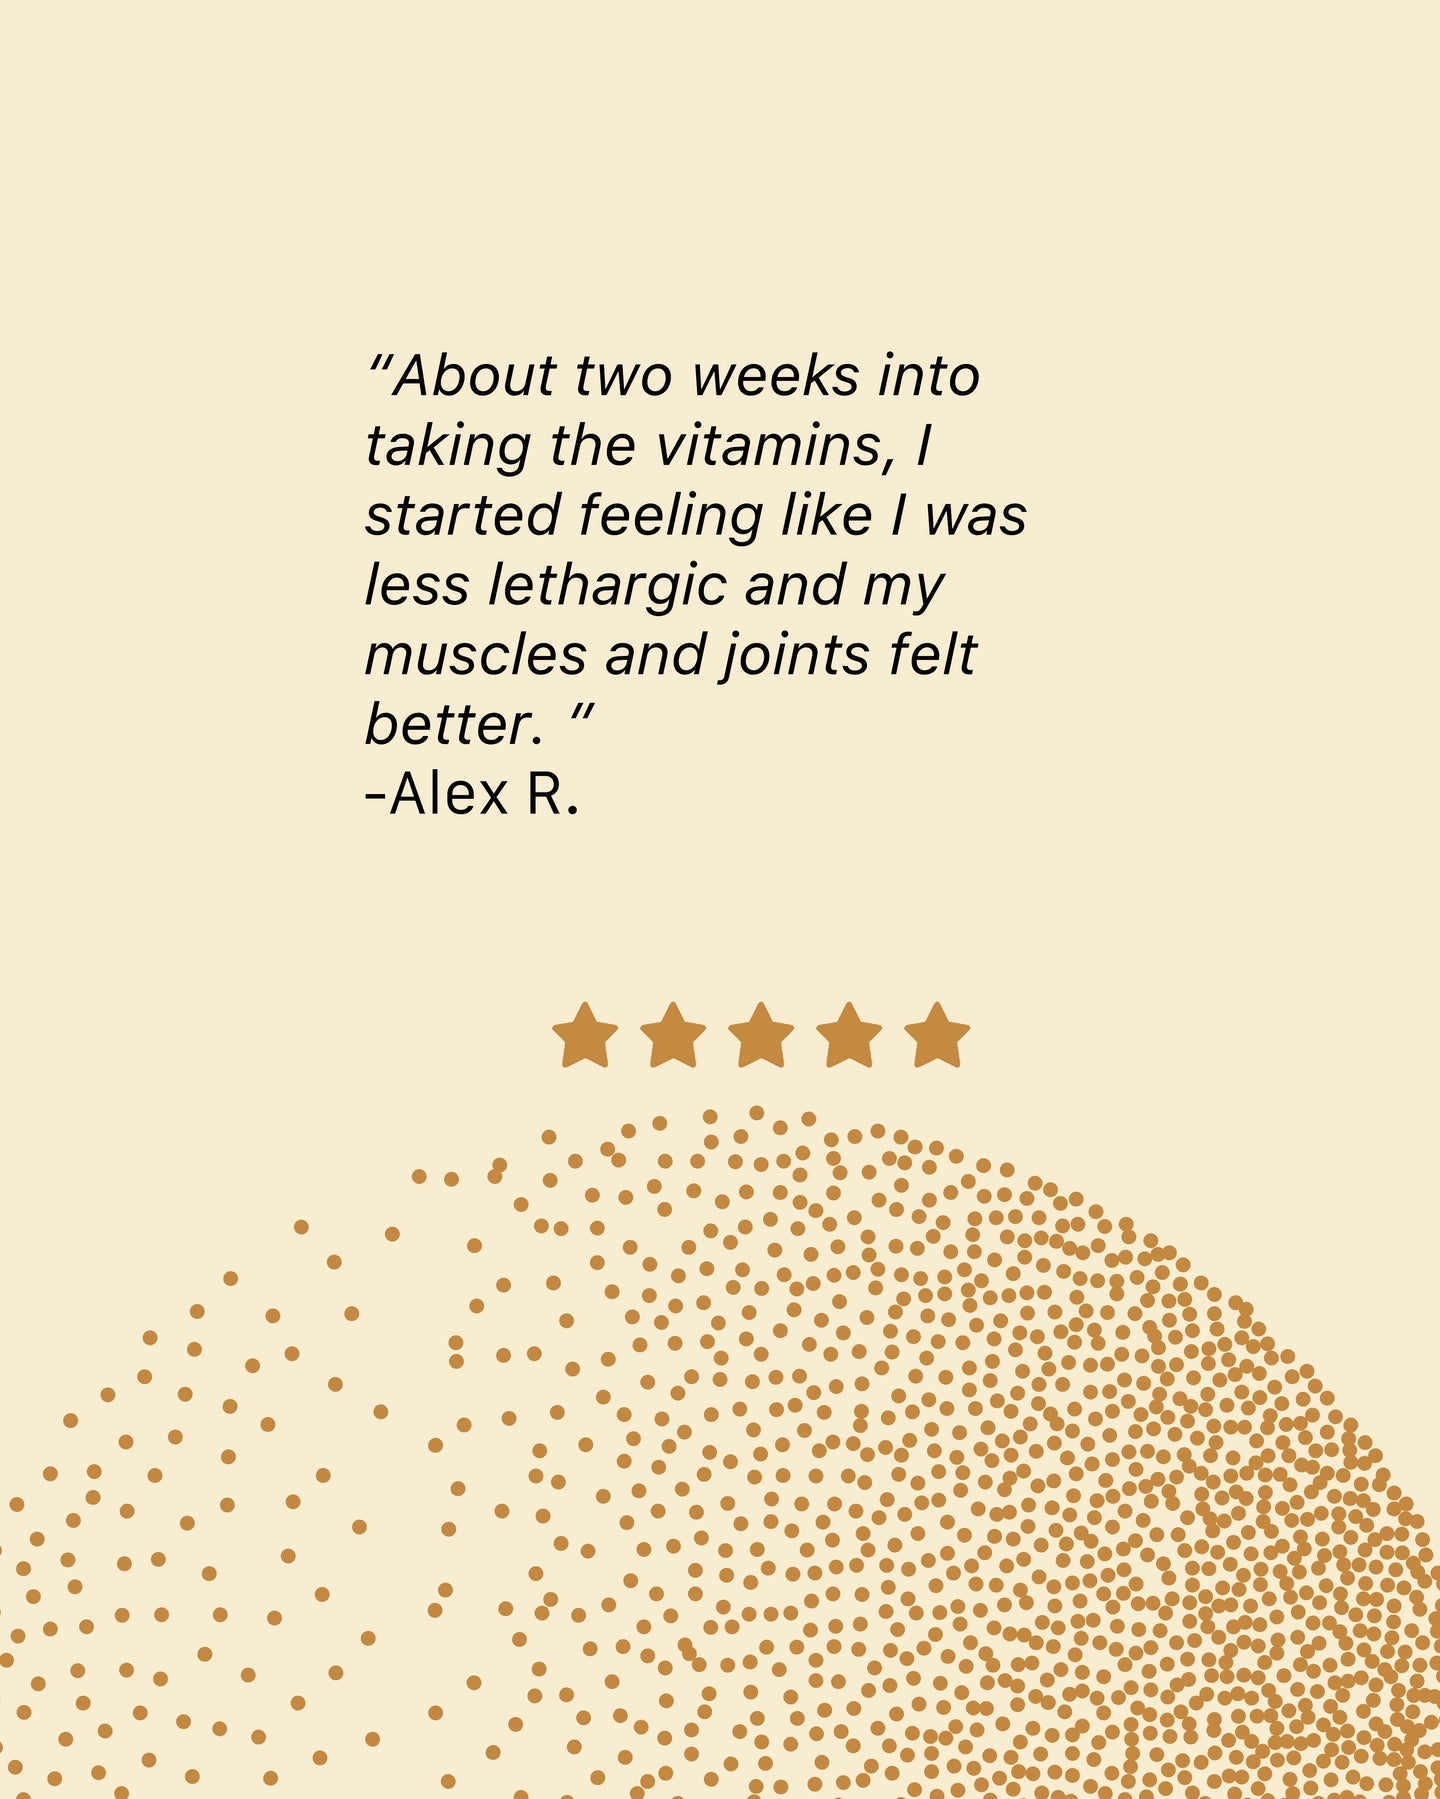 A review left by Alex R About two weeks into taking  the vitamins I started feeling like I was less lethargic and my muscles and joint felt better